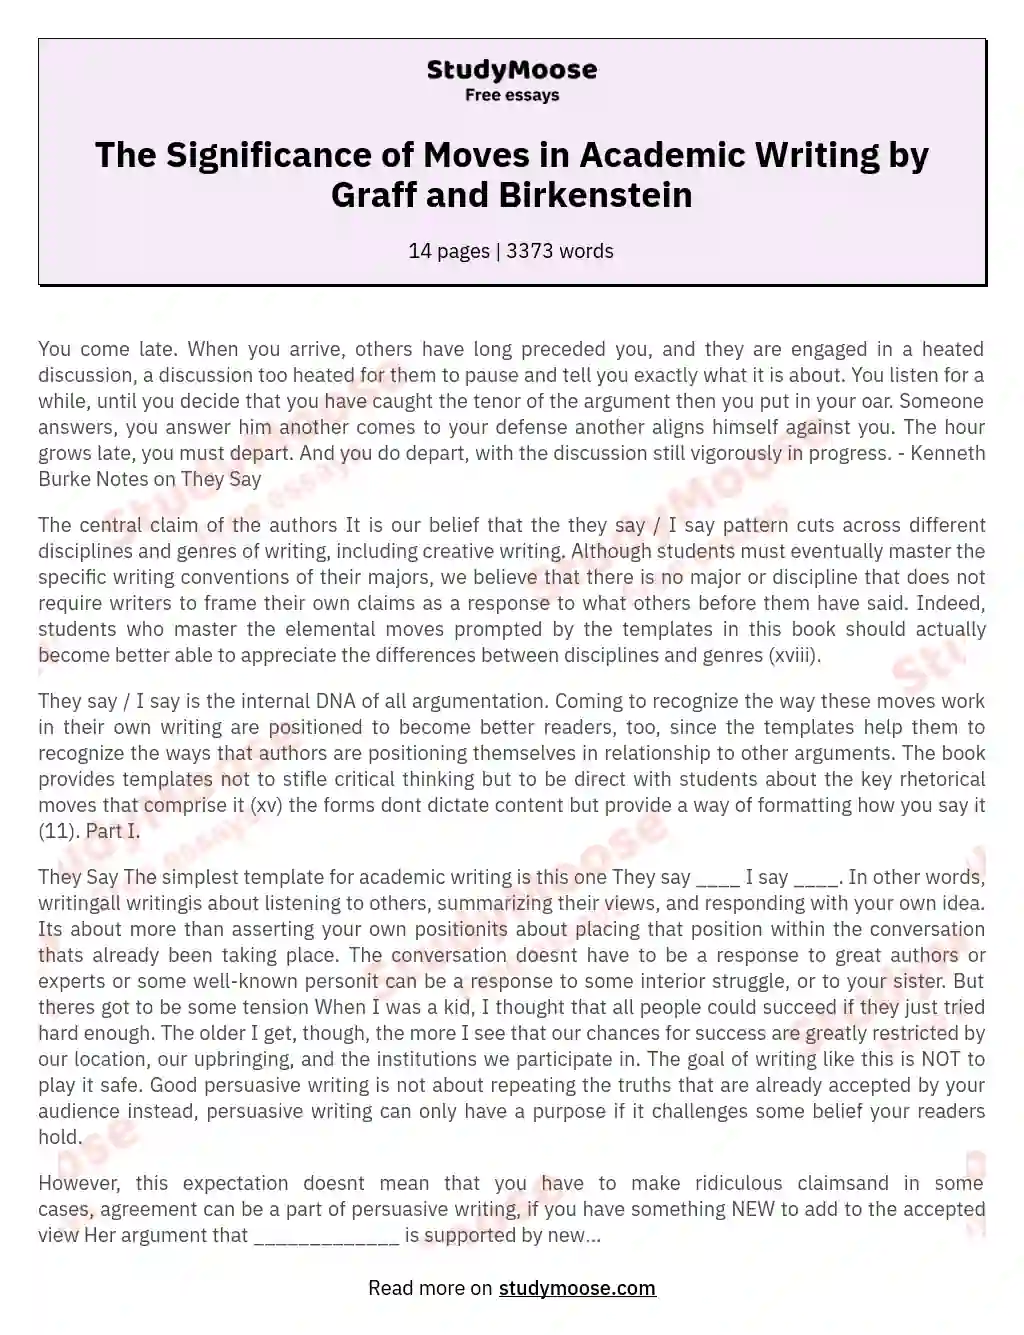 The Significance of Moves in Academic Writing by Graff and Birkenstein essay